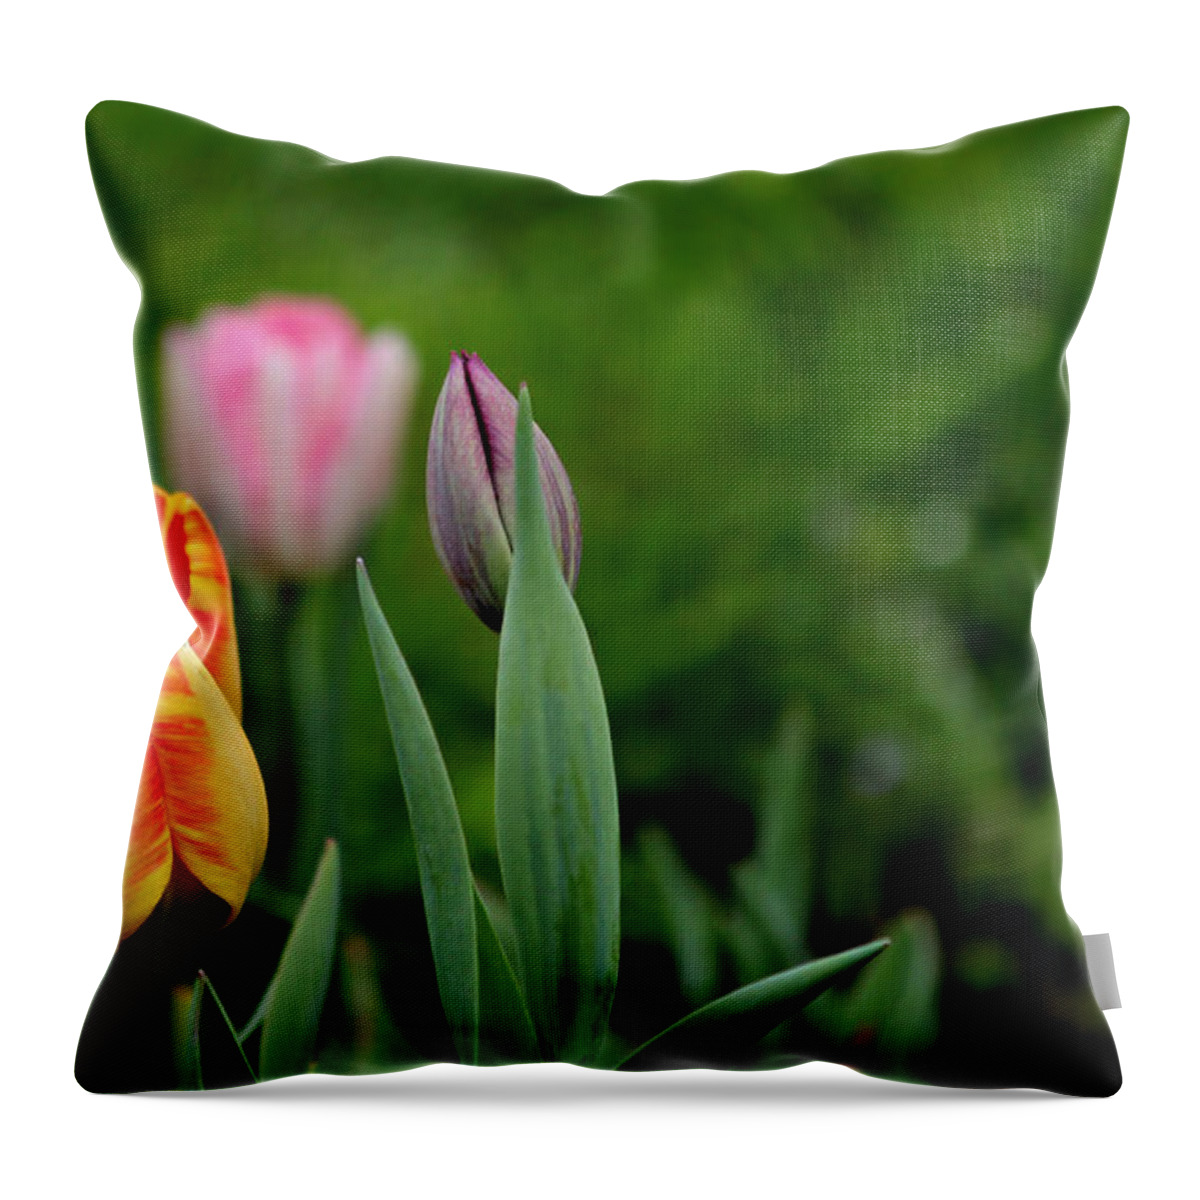 Flower Throw Pillow featuring the photograph Tulip Glory by Jeanette C Landstrom